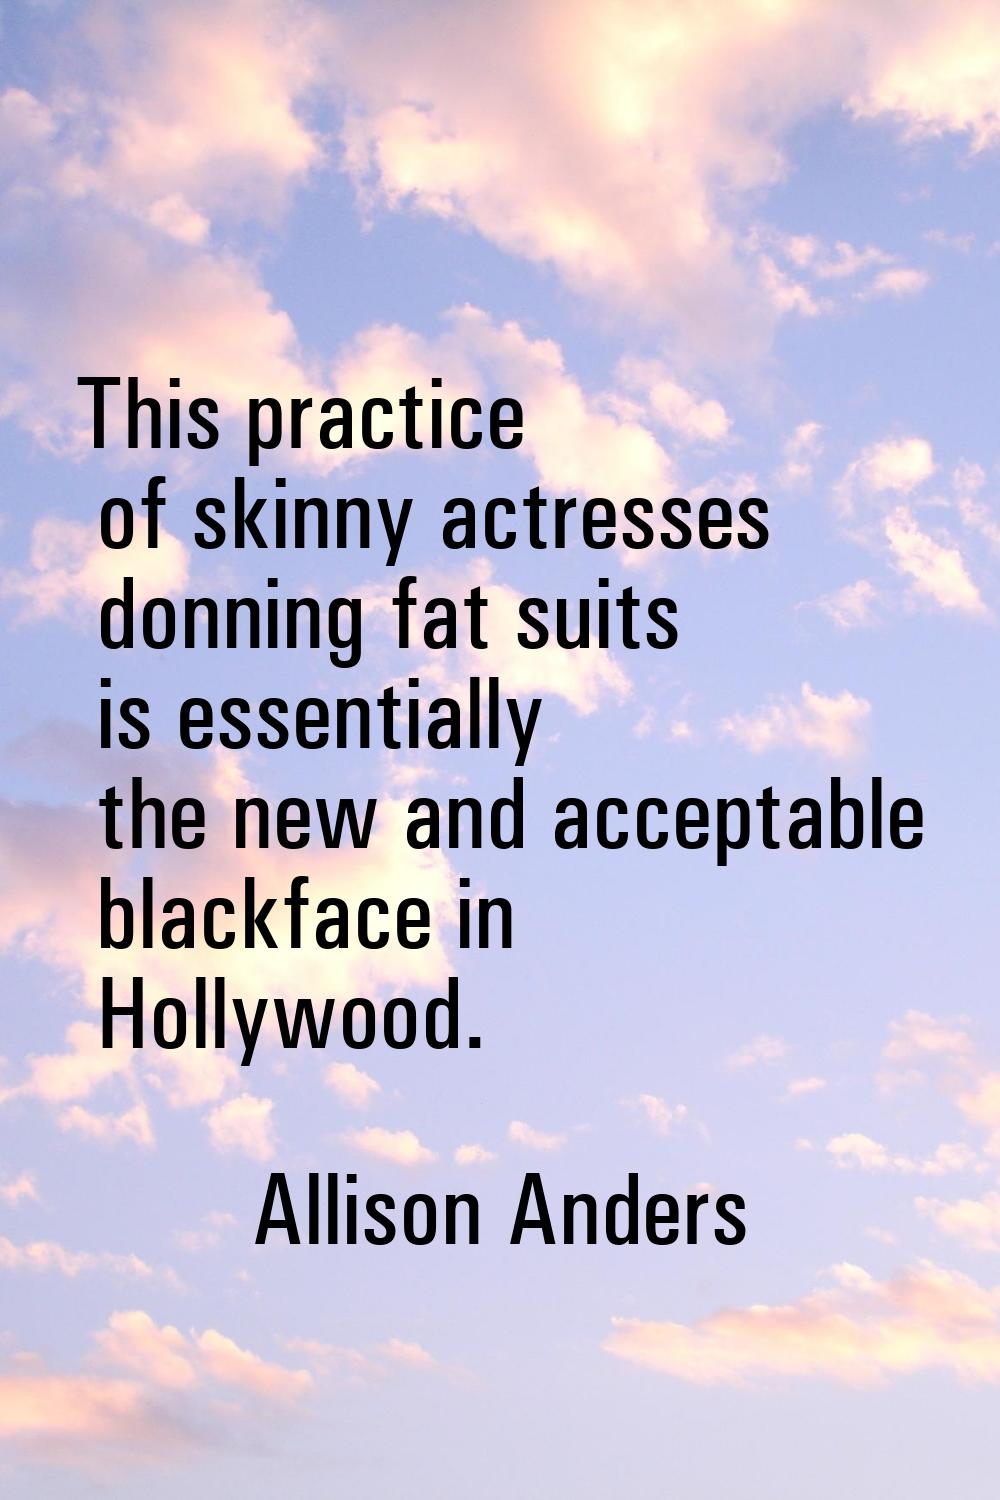 This practice of skinny actresses donning fat suits is essentially the new and acceptable blackface